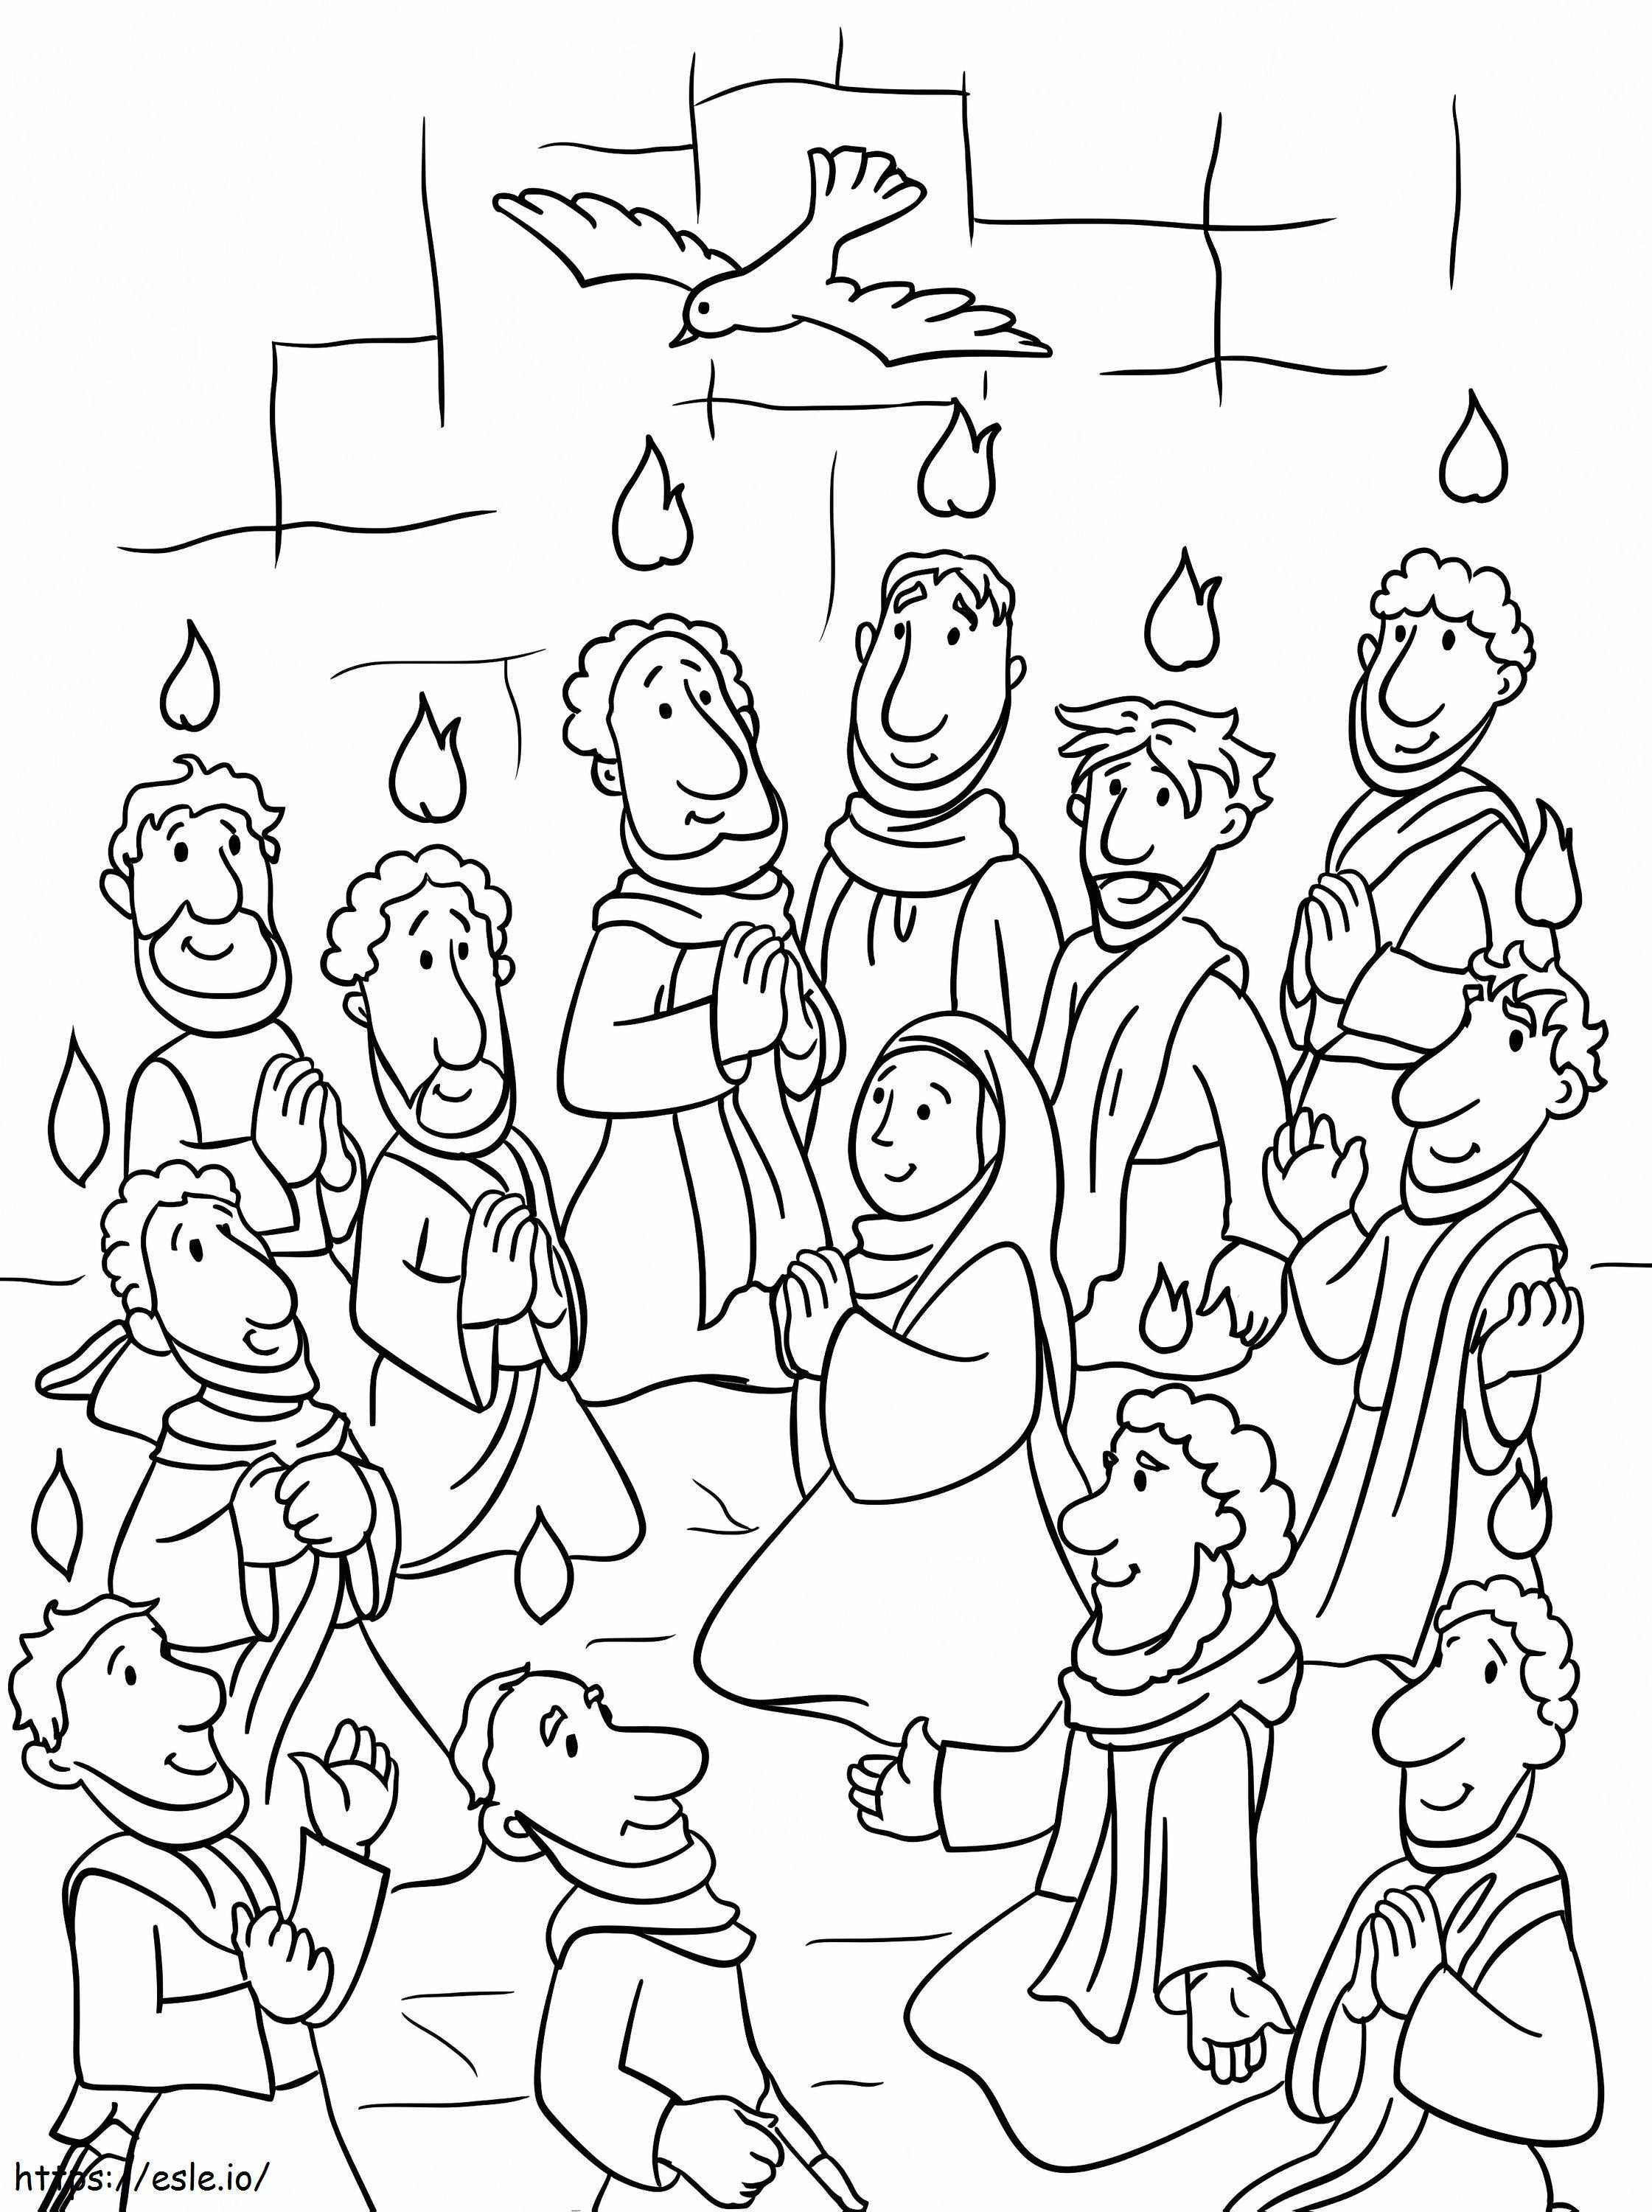 Pentecost 1 coloring page